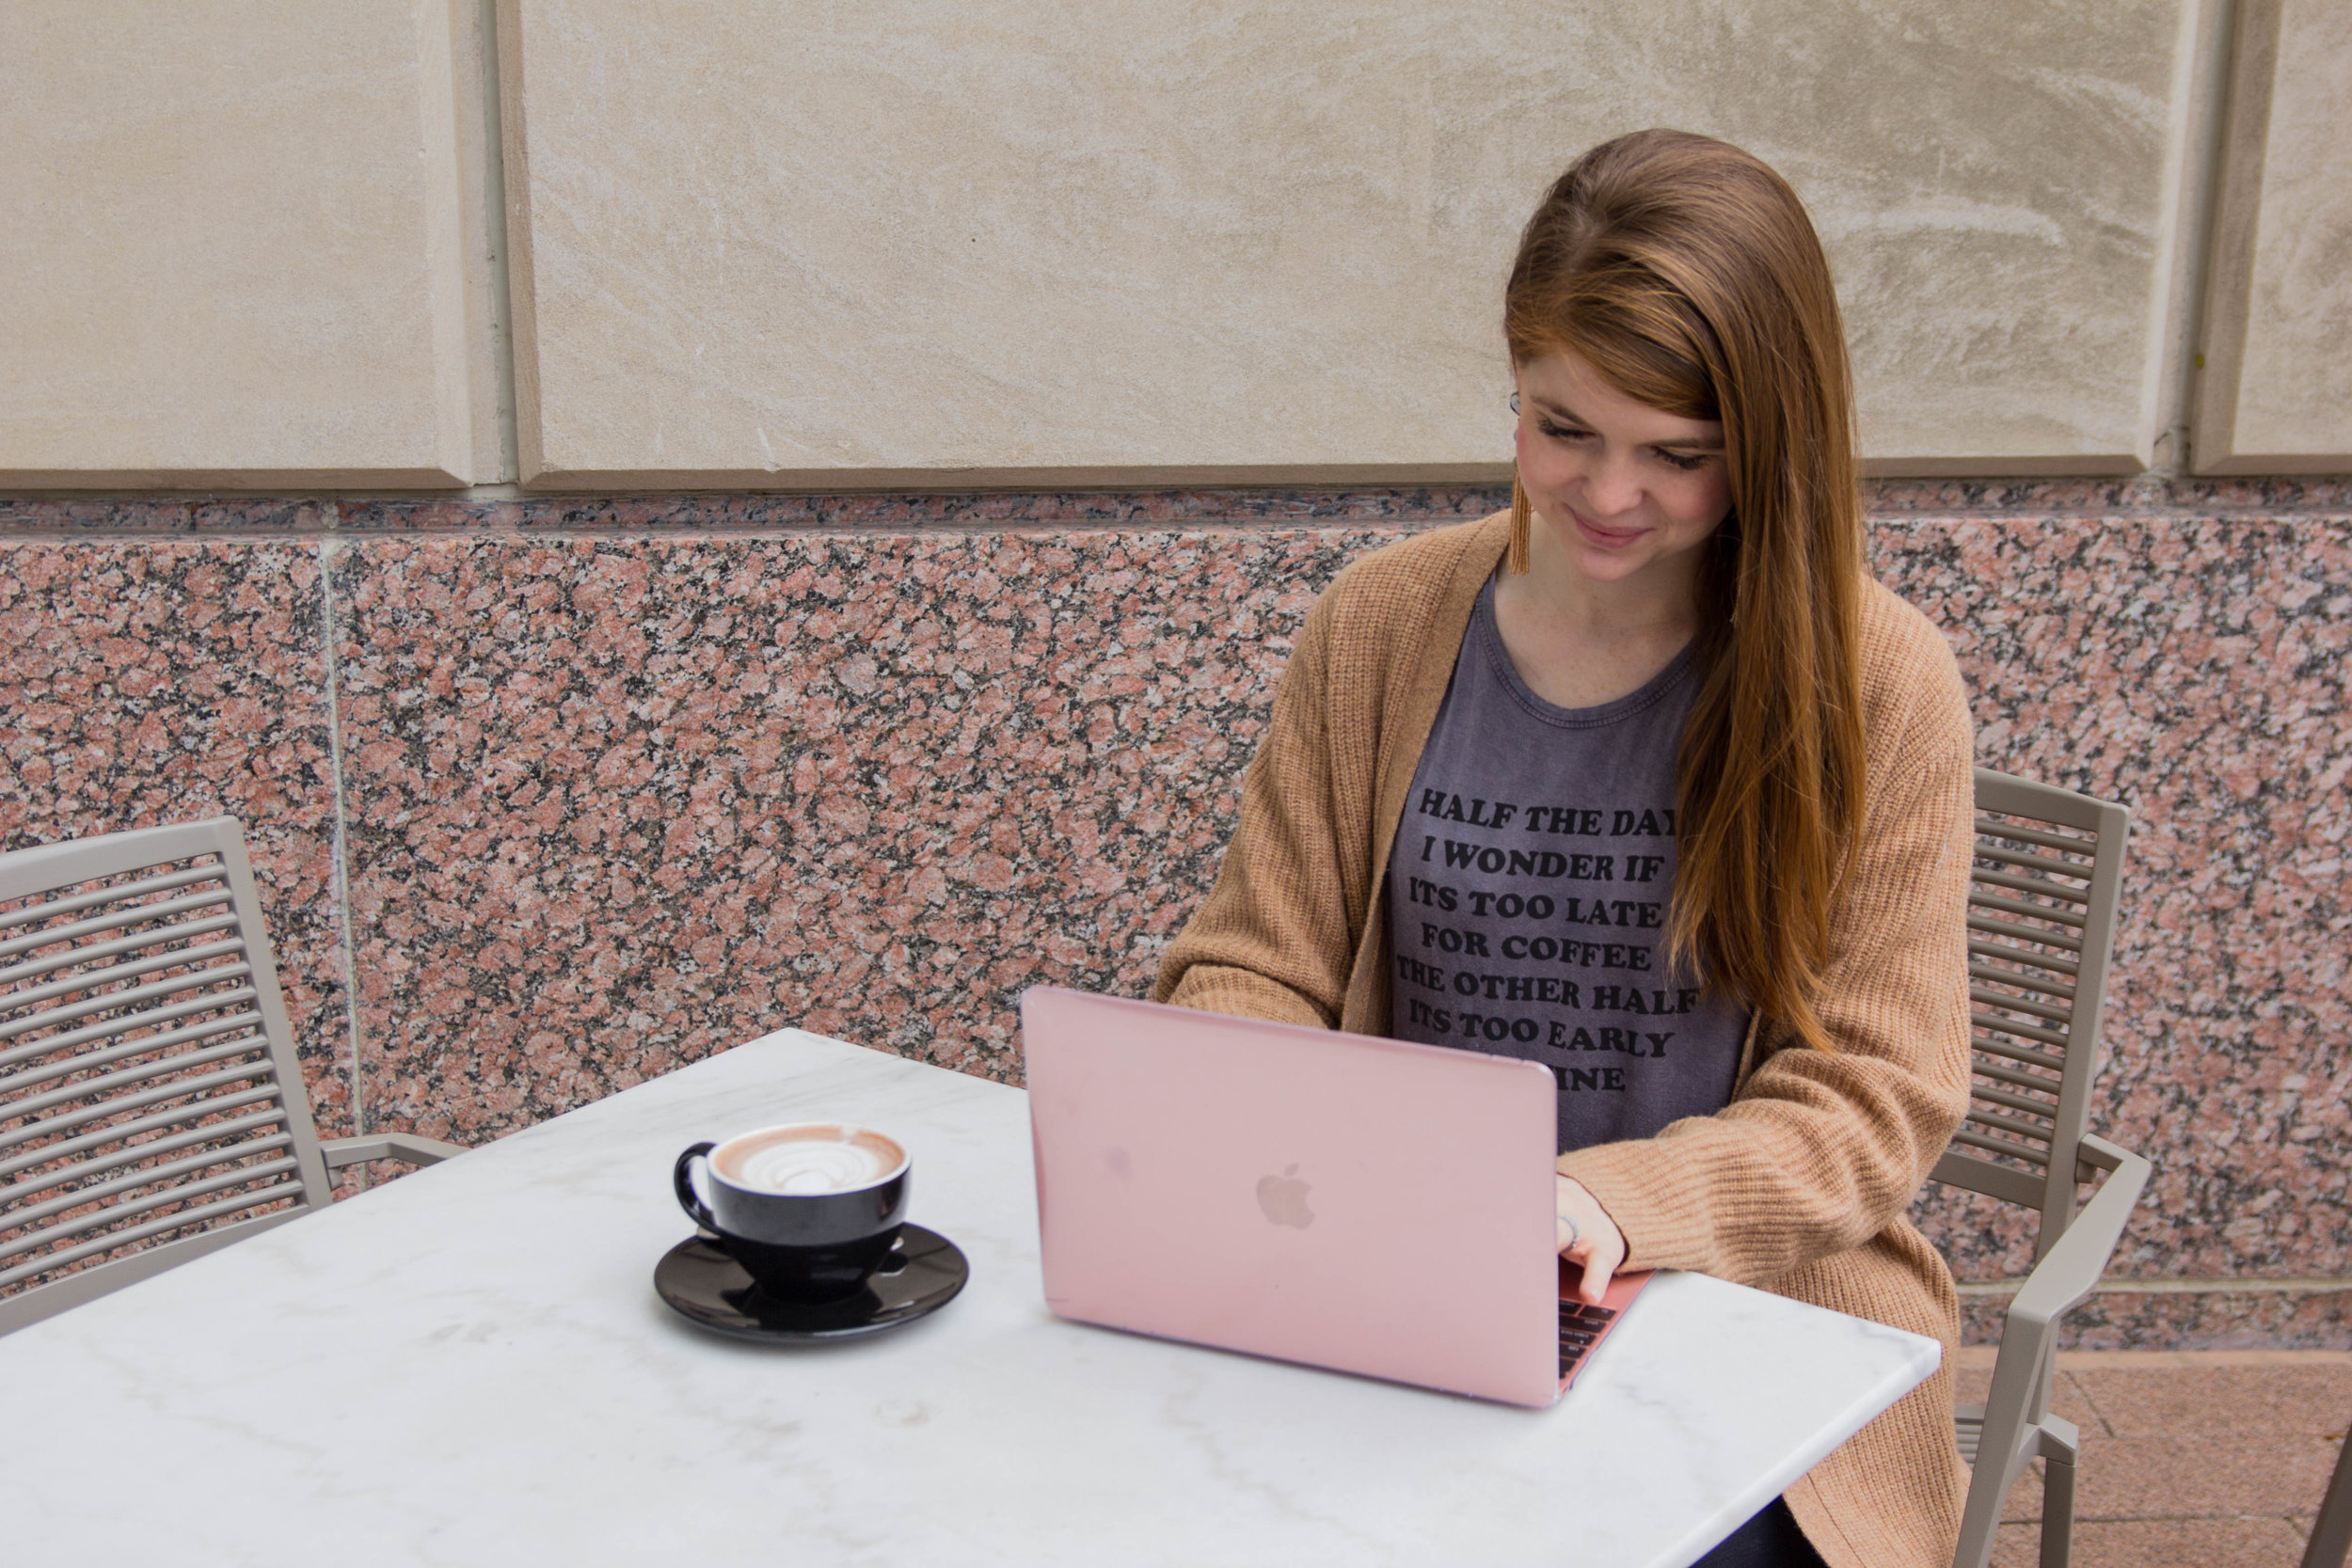 macbook tips, how i went from pc to mac, macbook 12", pink laptop, american eagle aerie don't ask why tank, j crew coat cardigan, long sweater, madewell distressed black jeans, baublebar tassel earrings, mac user, ascension coffee, dallas